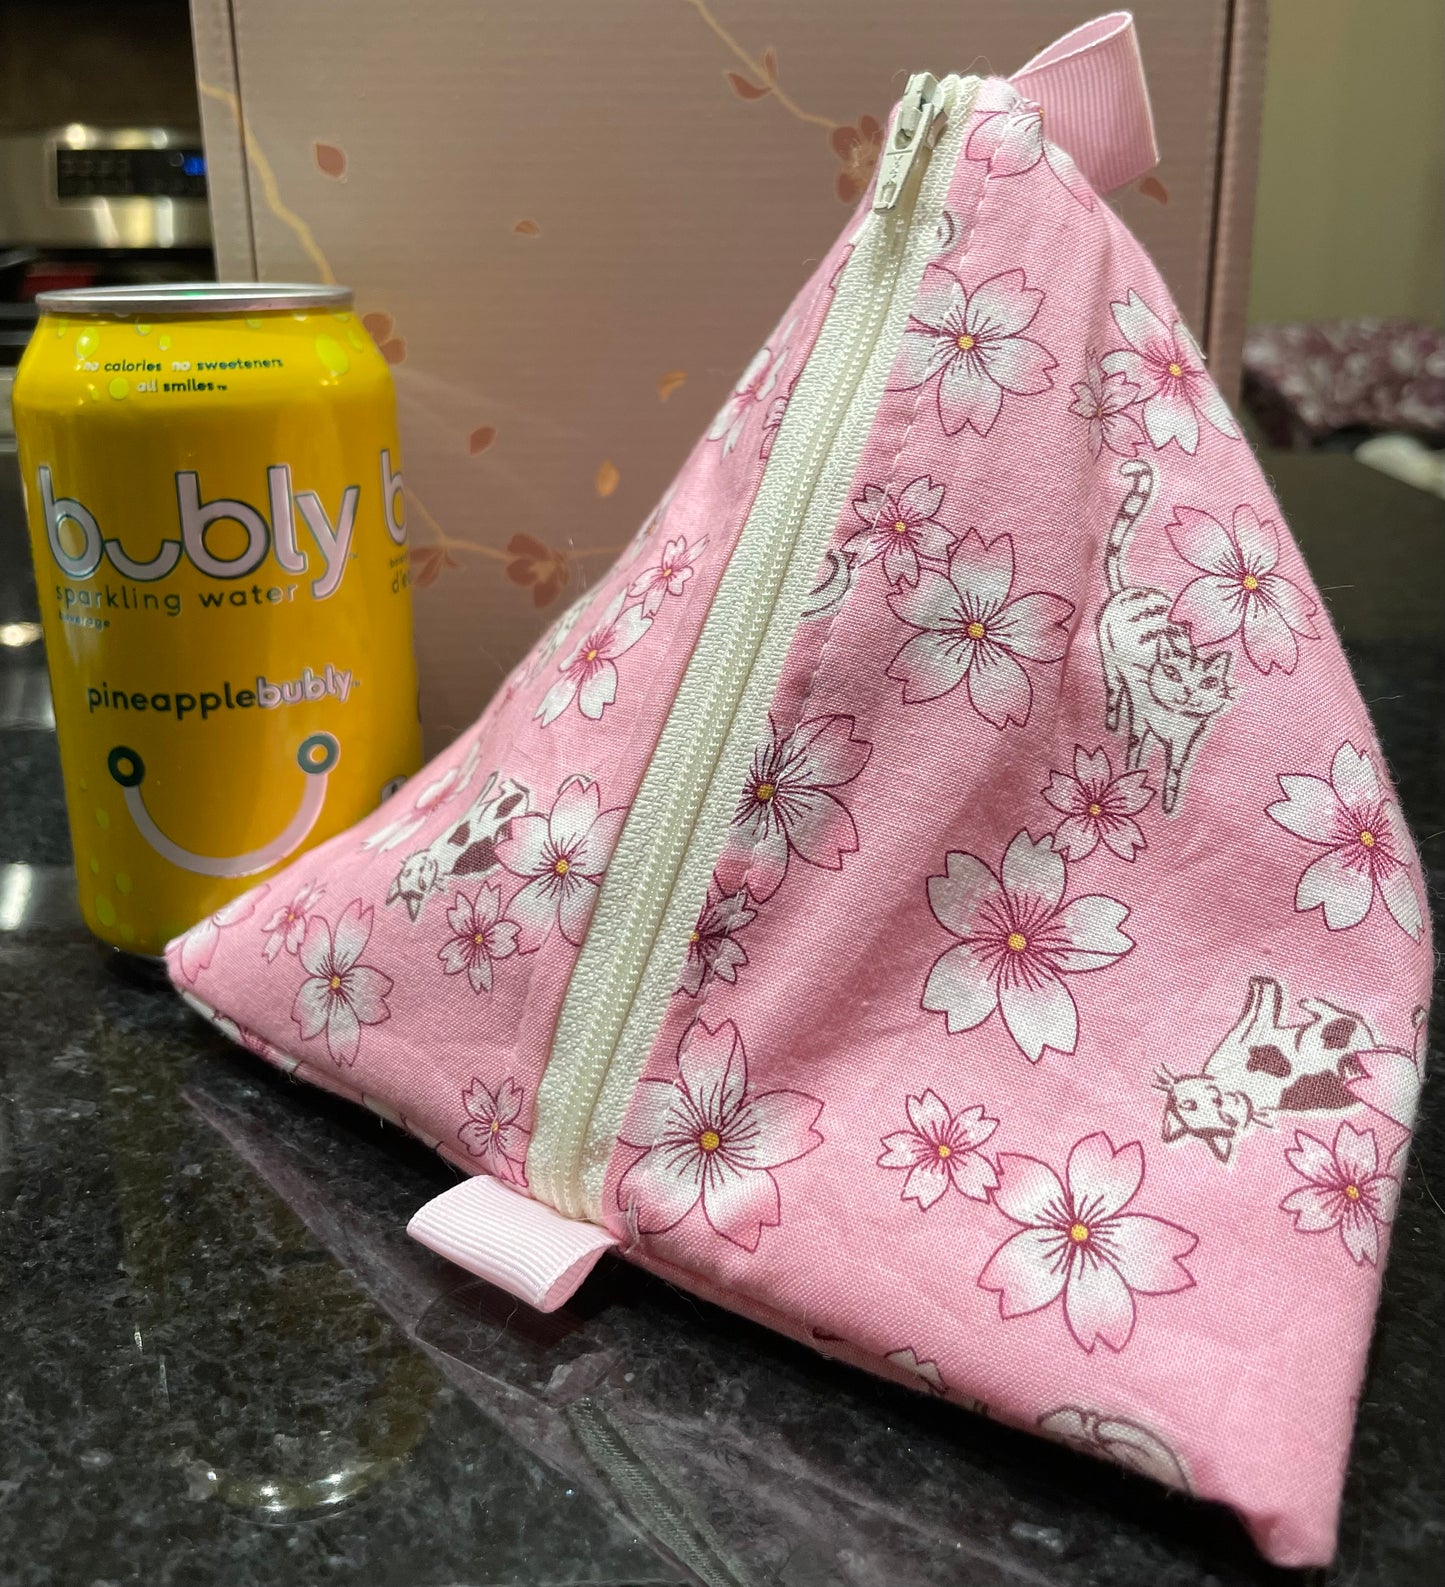 Triangle Pouch | Cats and Sakura on Light Pink